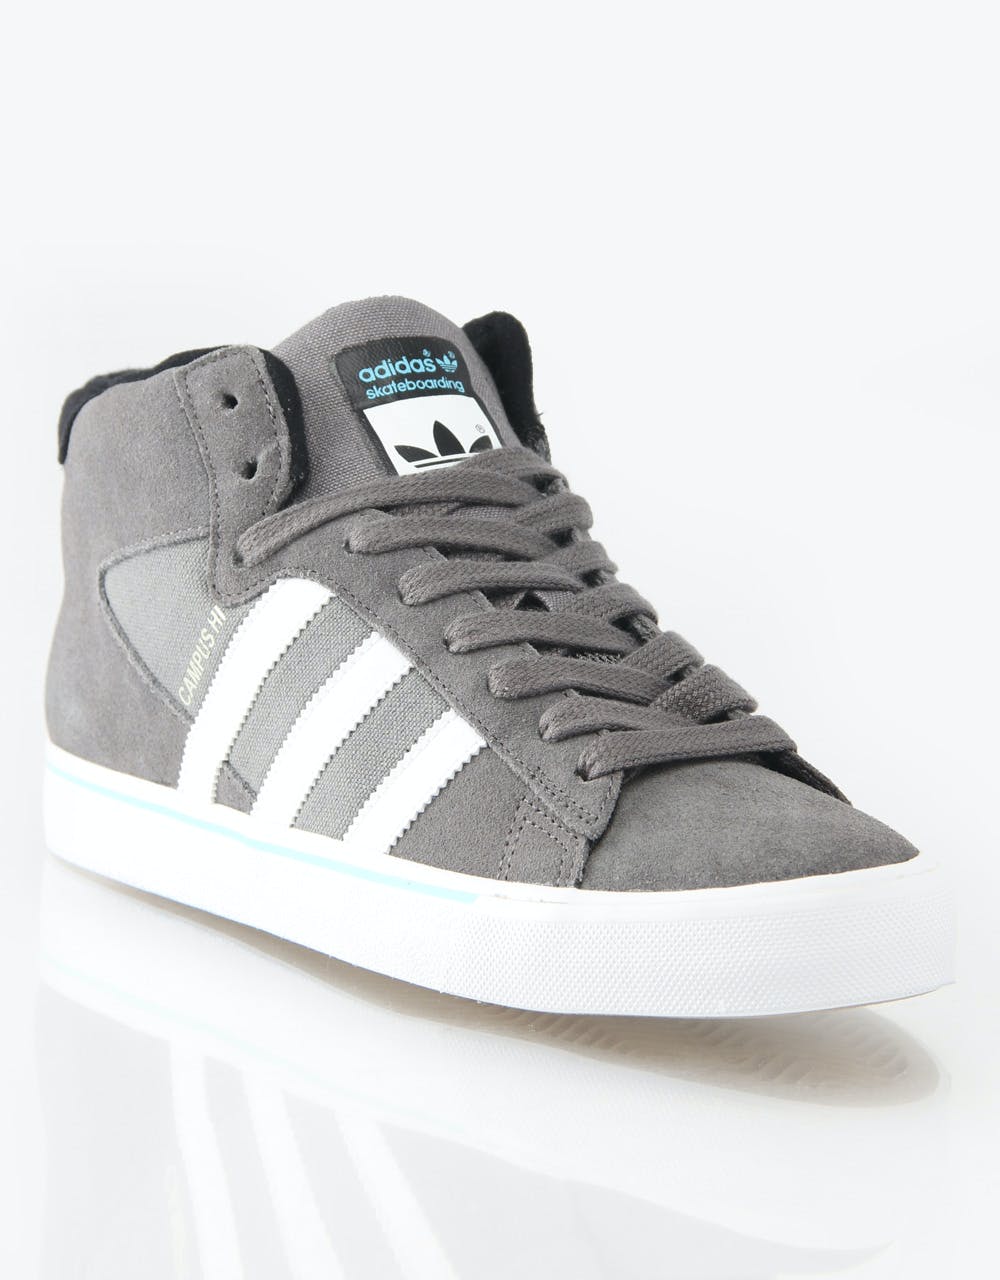 adidas Campus Vulc Mid Skate Shoes - Cinder/White/Black – Route One